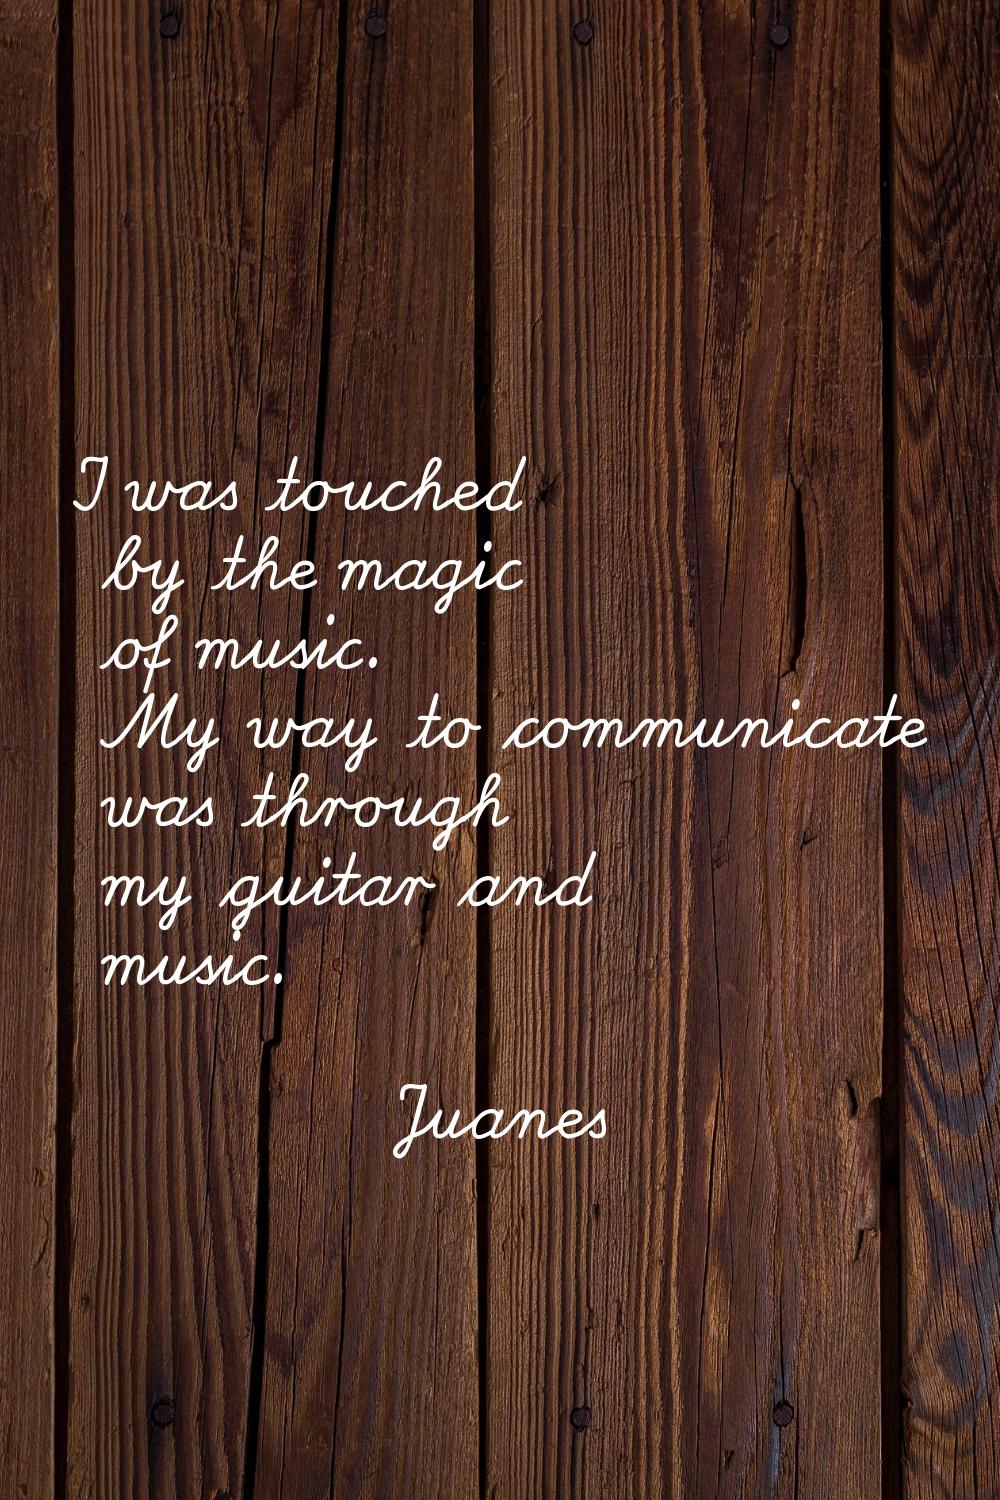 I was touched by the magic of music. My way to communicate was through my guitar and music.